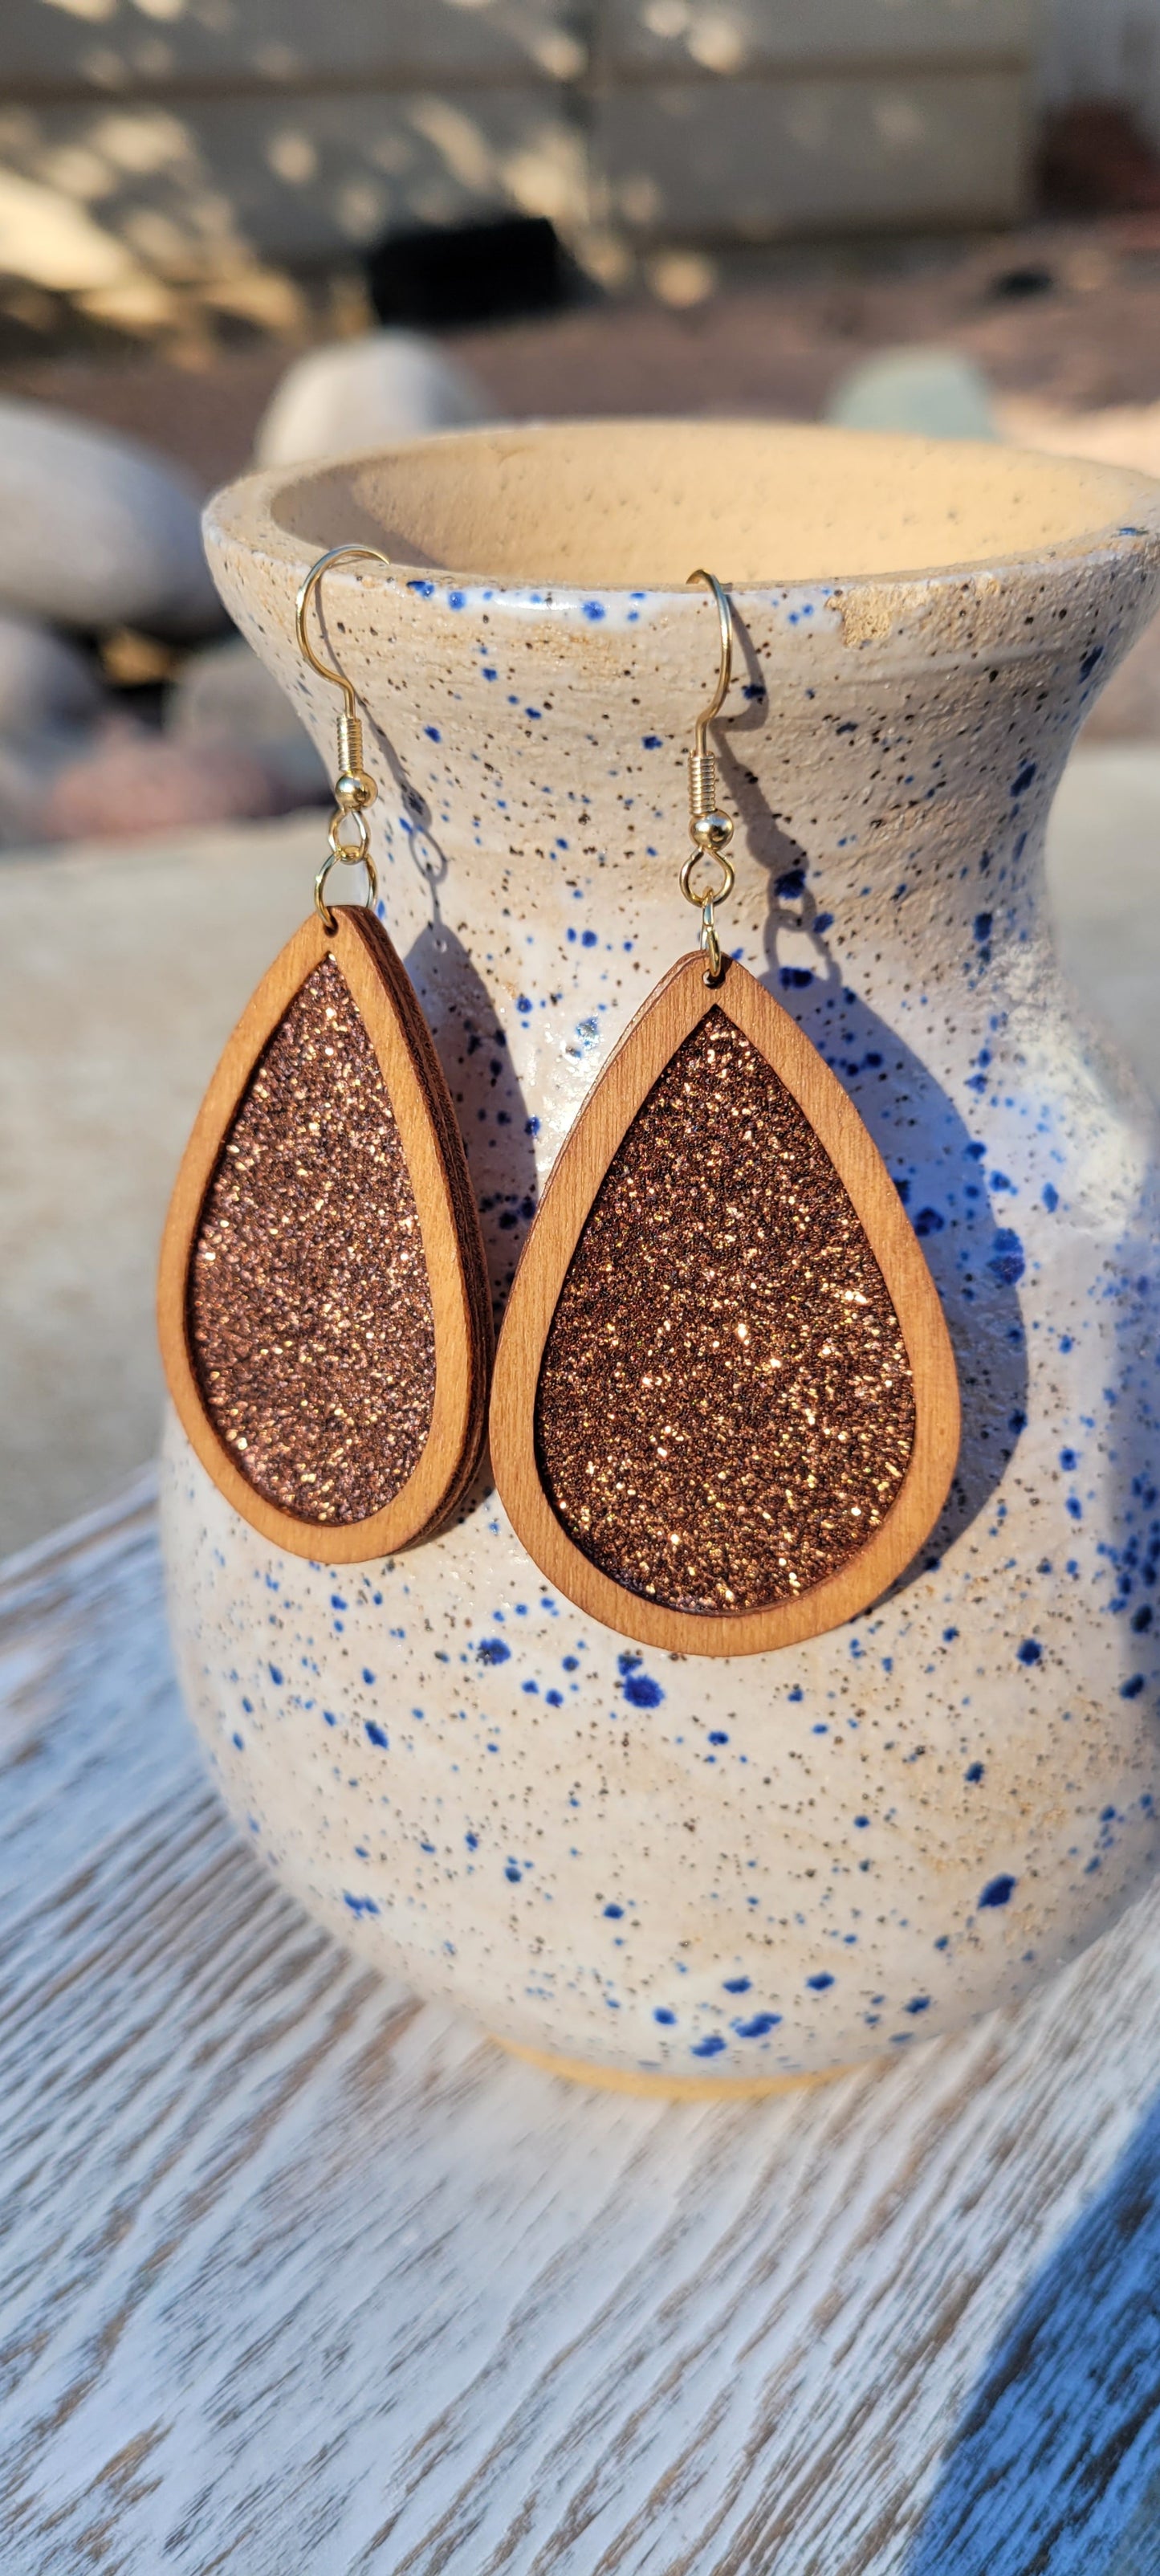 Light brown wood Cinnamon glitter Teardrop shape Brushed gold fish hook dangle earrings Rubber earring back Drop length 2”, width 1.33” Whether you want to be on the wild side or classy this earring set it will add a fun touch to your outfit